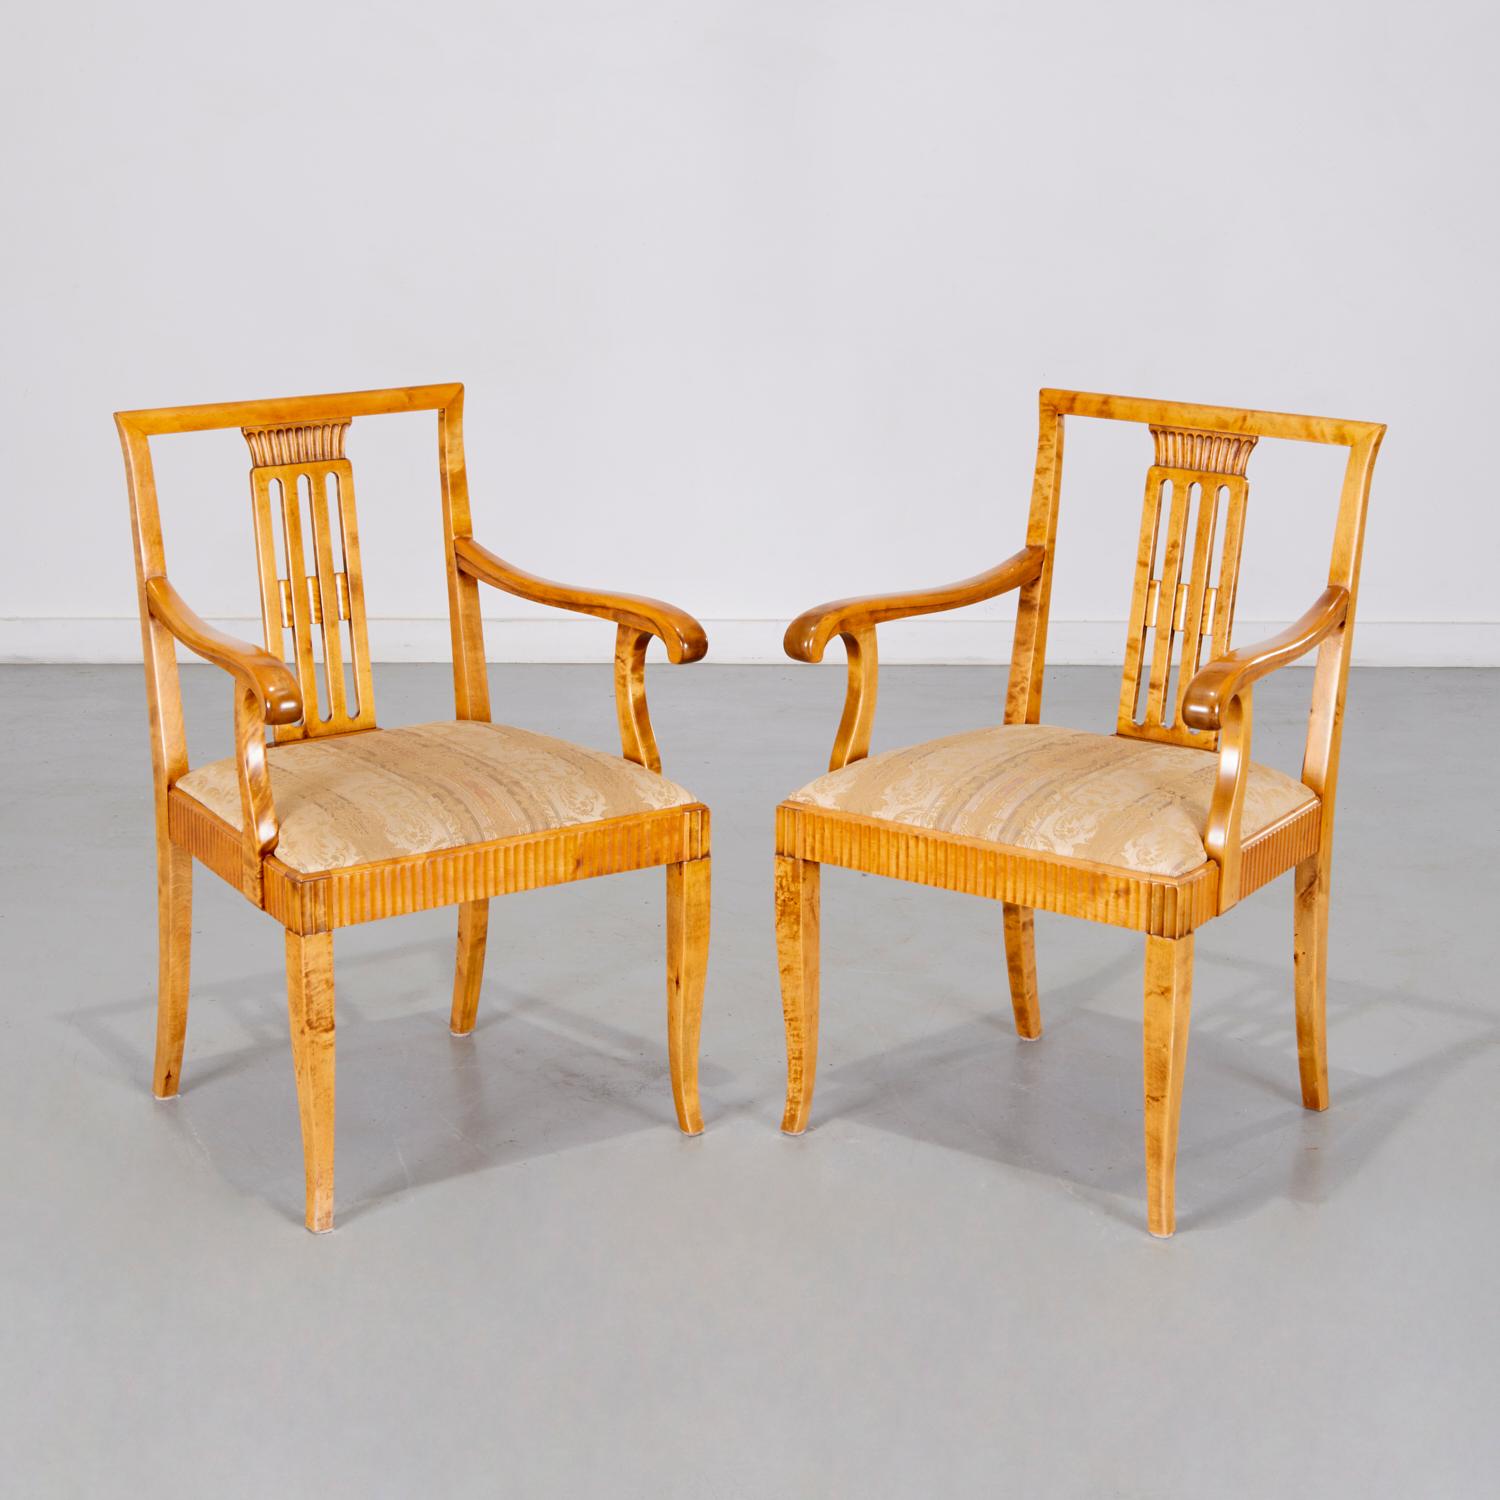 20th c. Pair of Swedish Neoclassical Birch Armchairs with Damask Upholstery For Sale 5